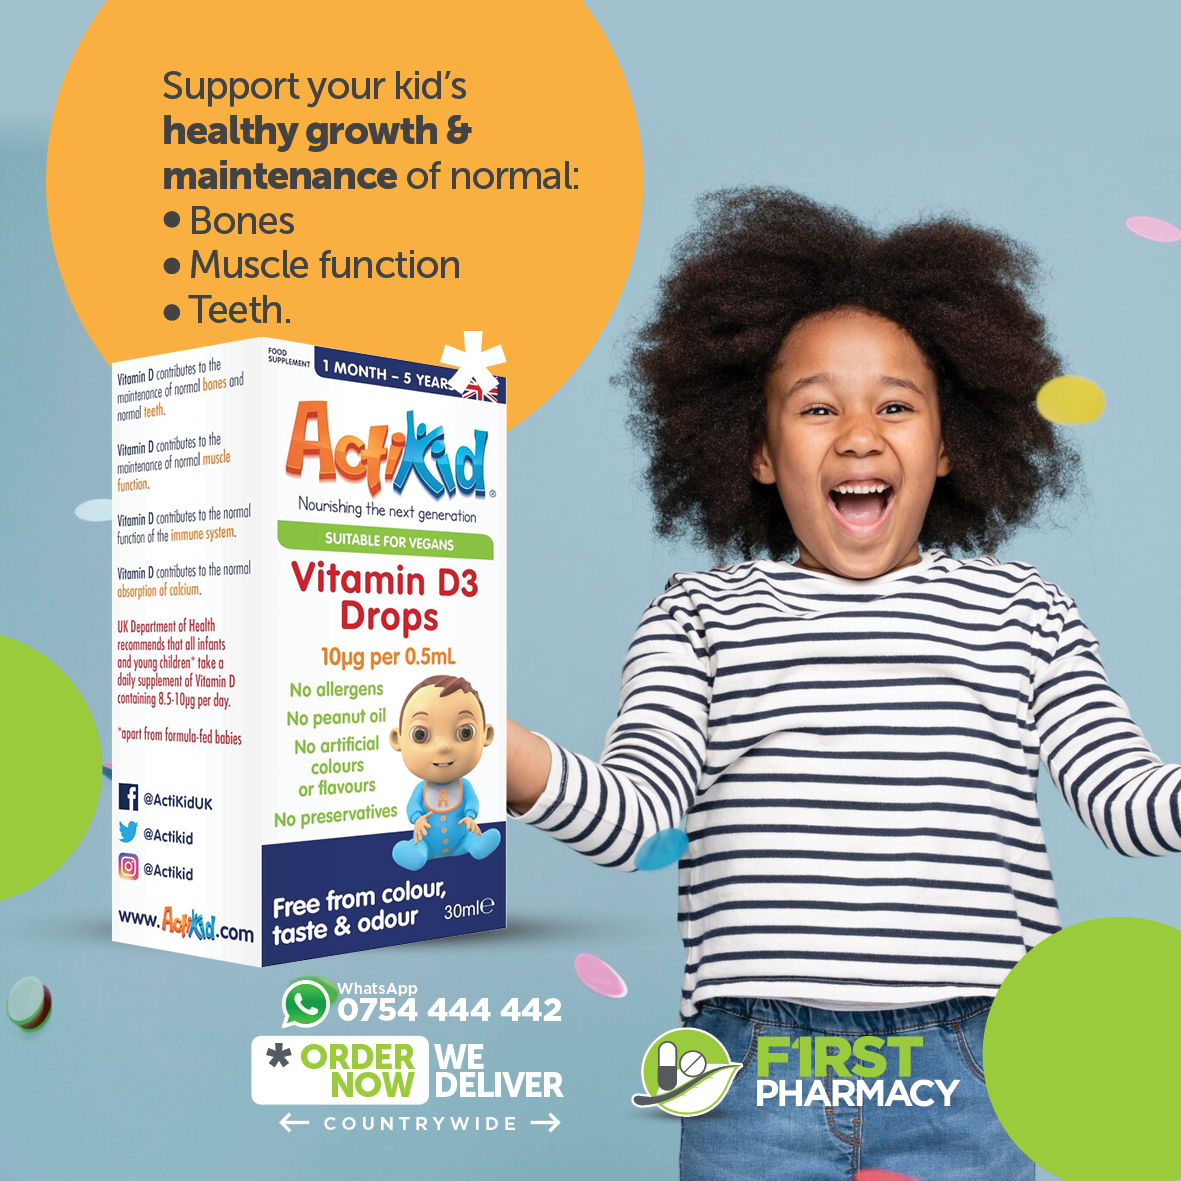 Children need lots of support to ensure that they have healthy growth and maintenance of normal bones, normal muscle function, and normal teeth. 

A supplement like ActiKid Vitamin D3 Drops comes in handy in contributing to meet these needs from 1 month to 5 years.